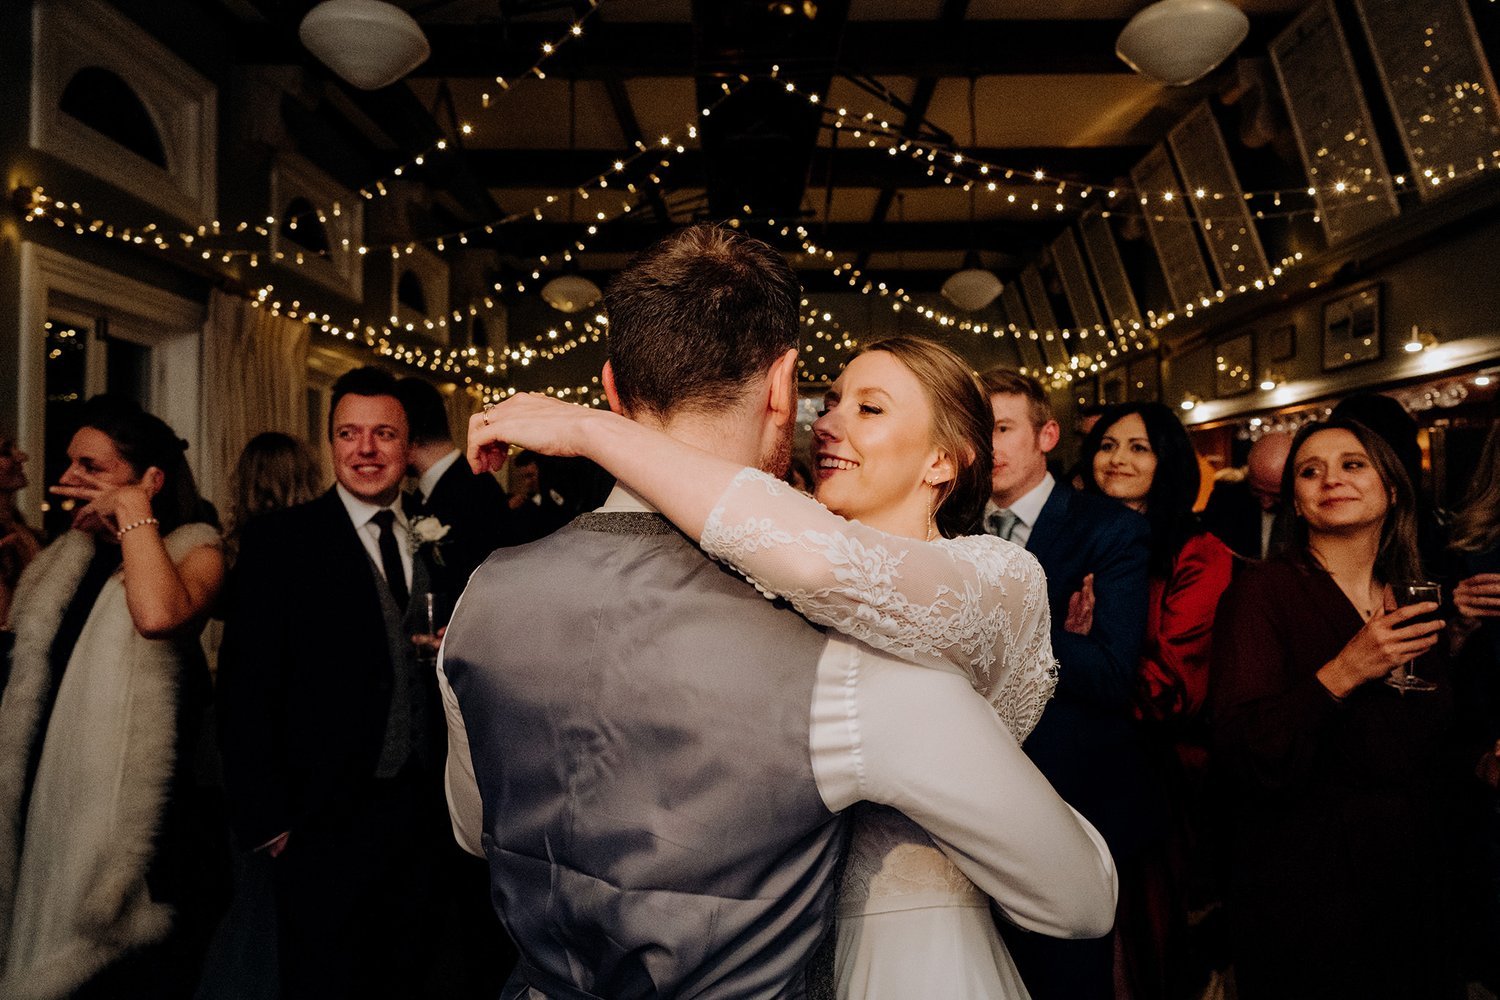 Bride and Groom share a moment on the dancefloor